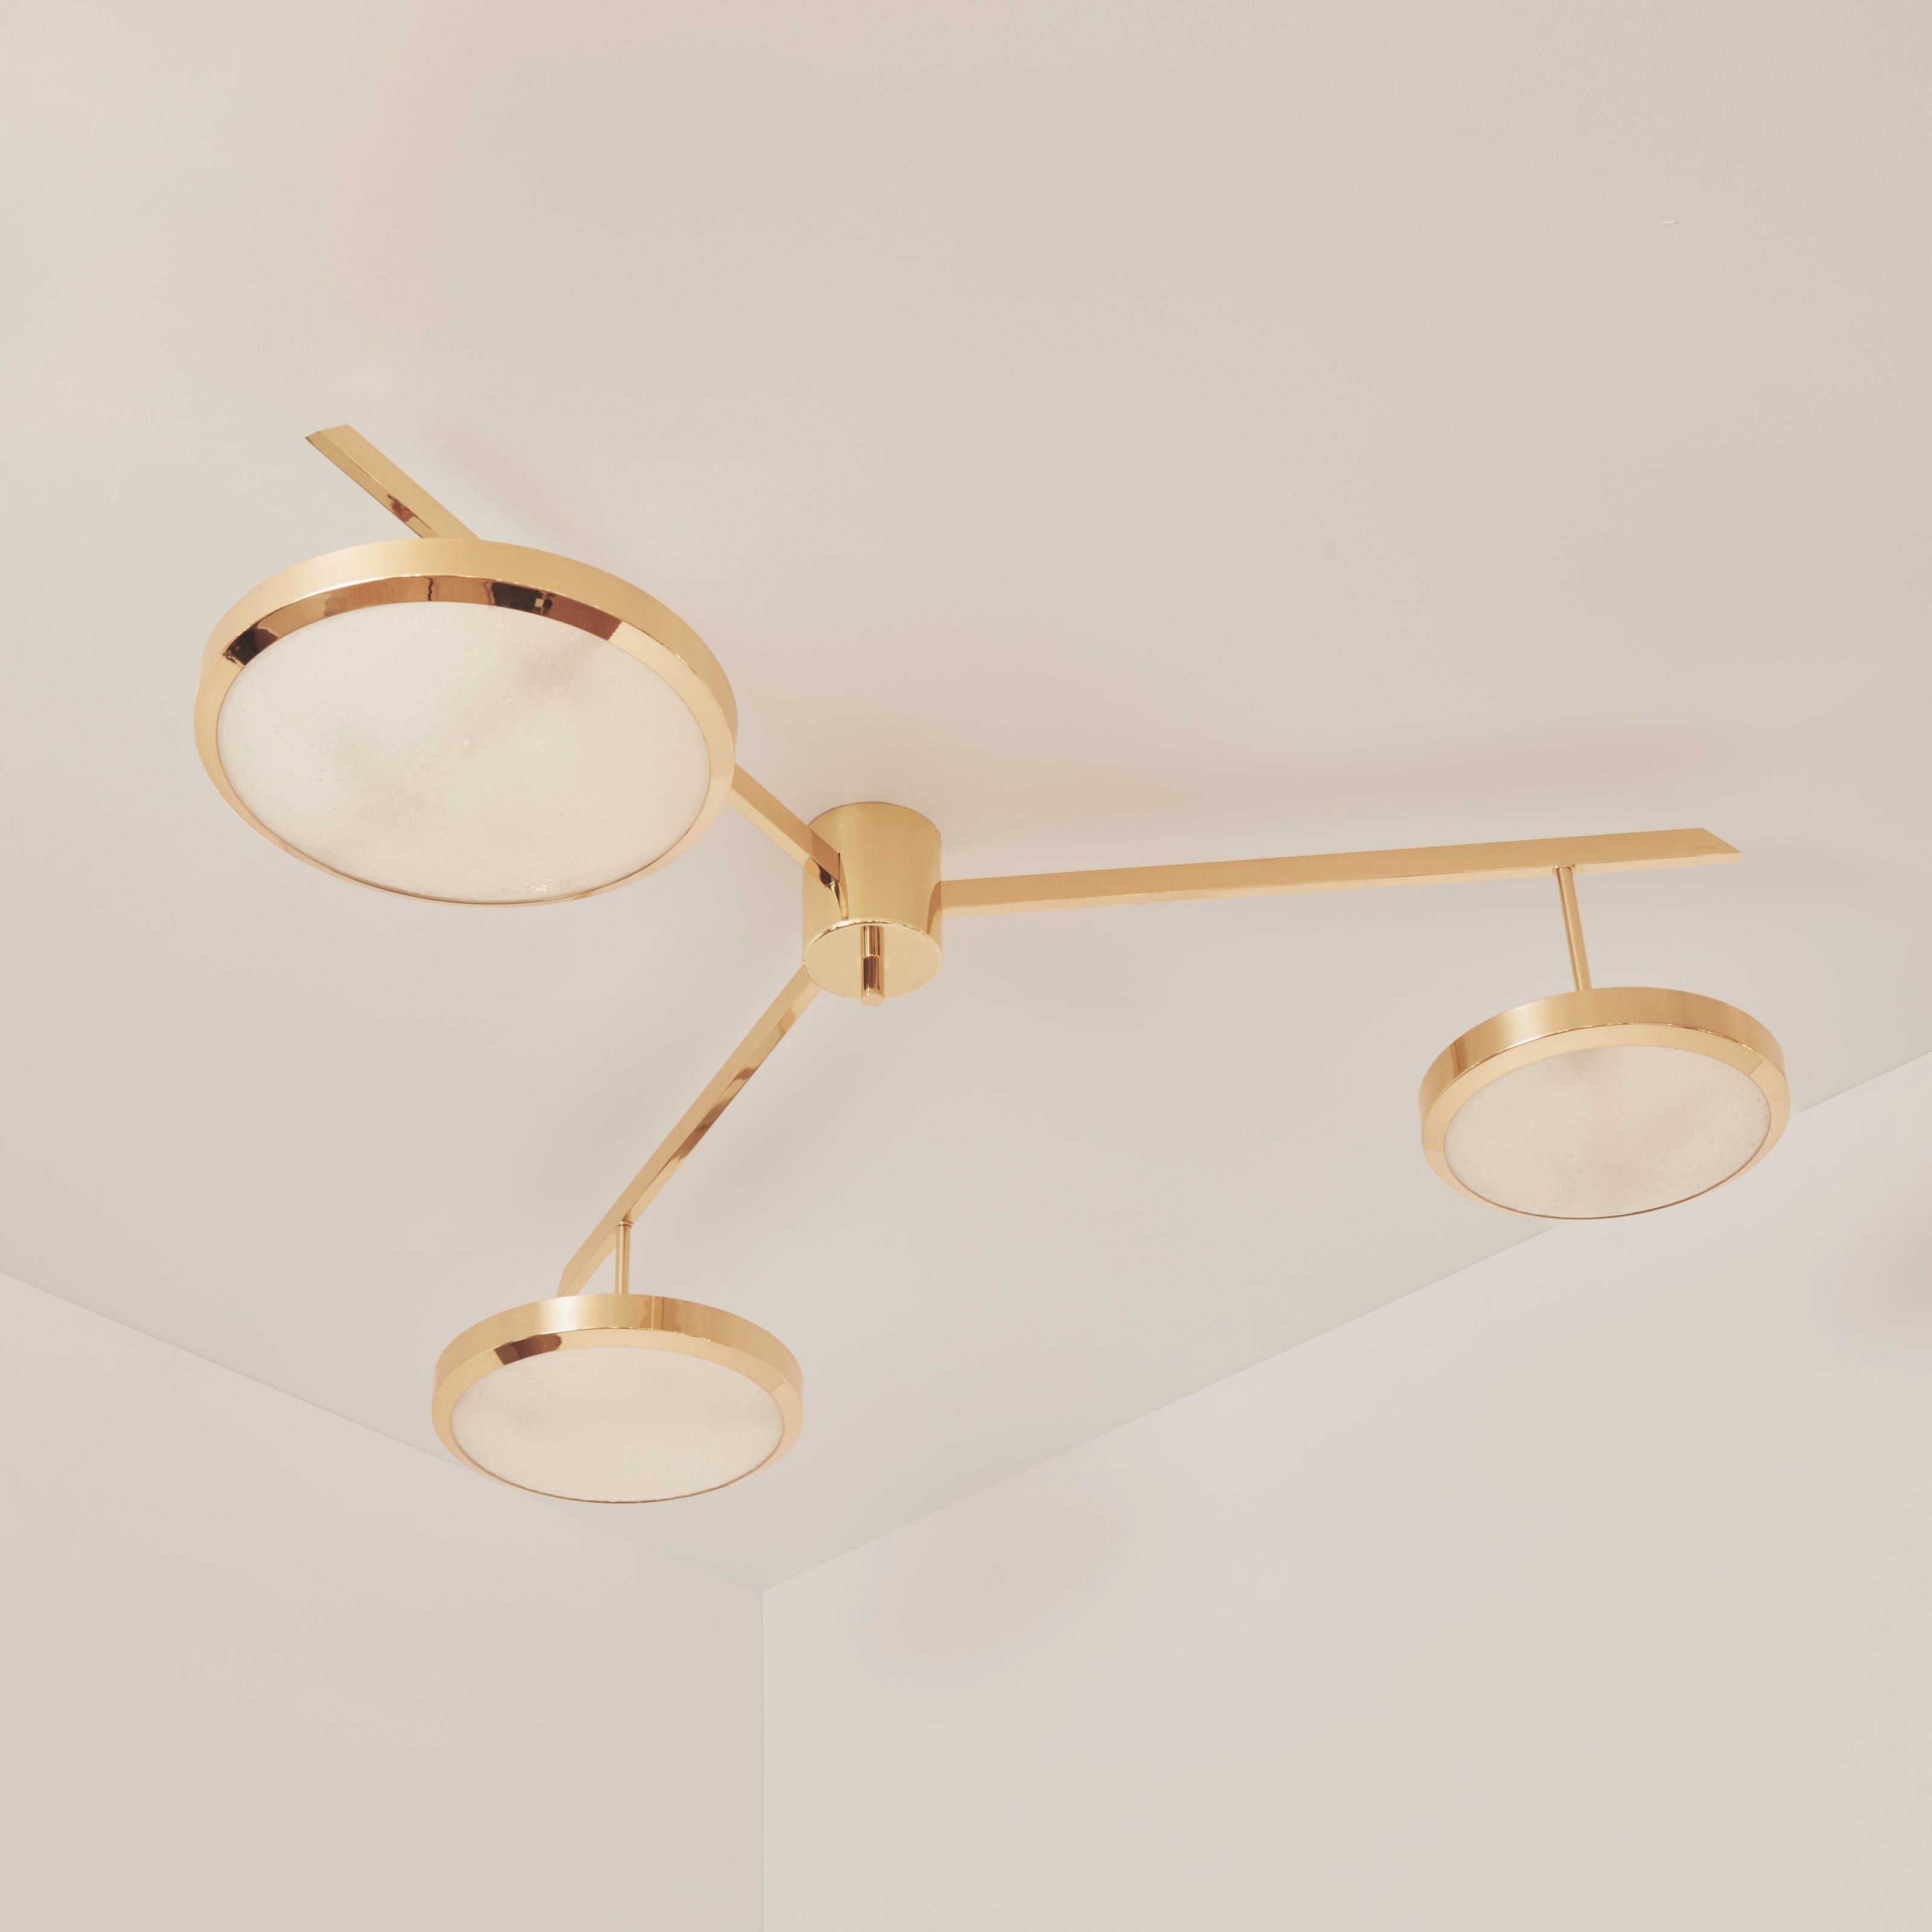 Contemporary Tre Ceiling Light by Gaspare Asaro - Bronze Finish For Sale